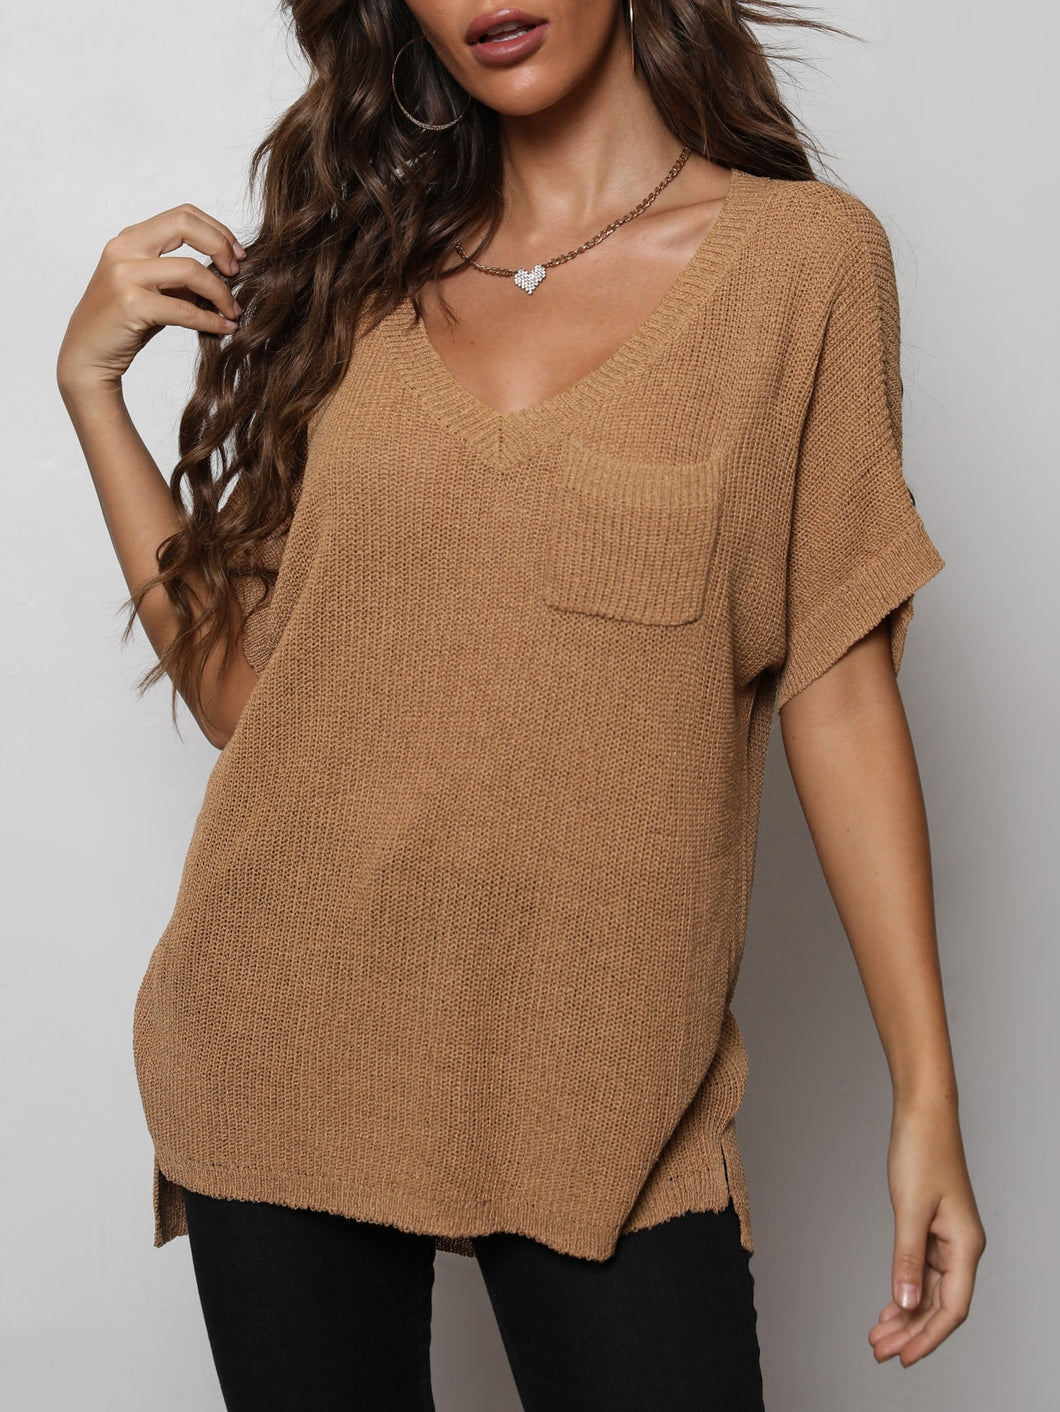 V-Neck Slit High-Low Knit Top  (Also available in Black)